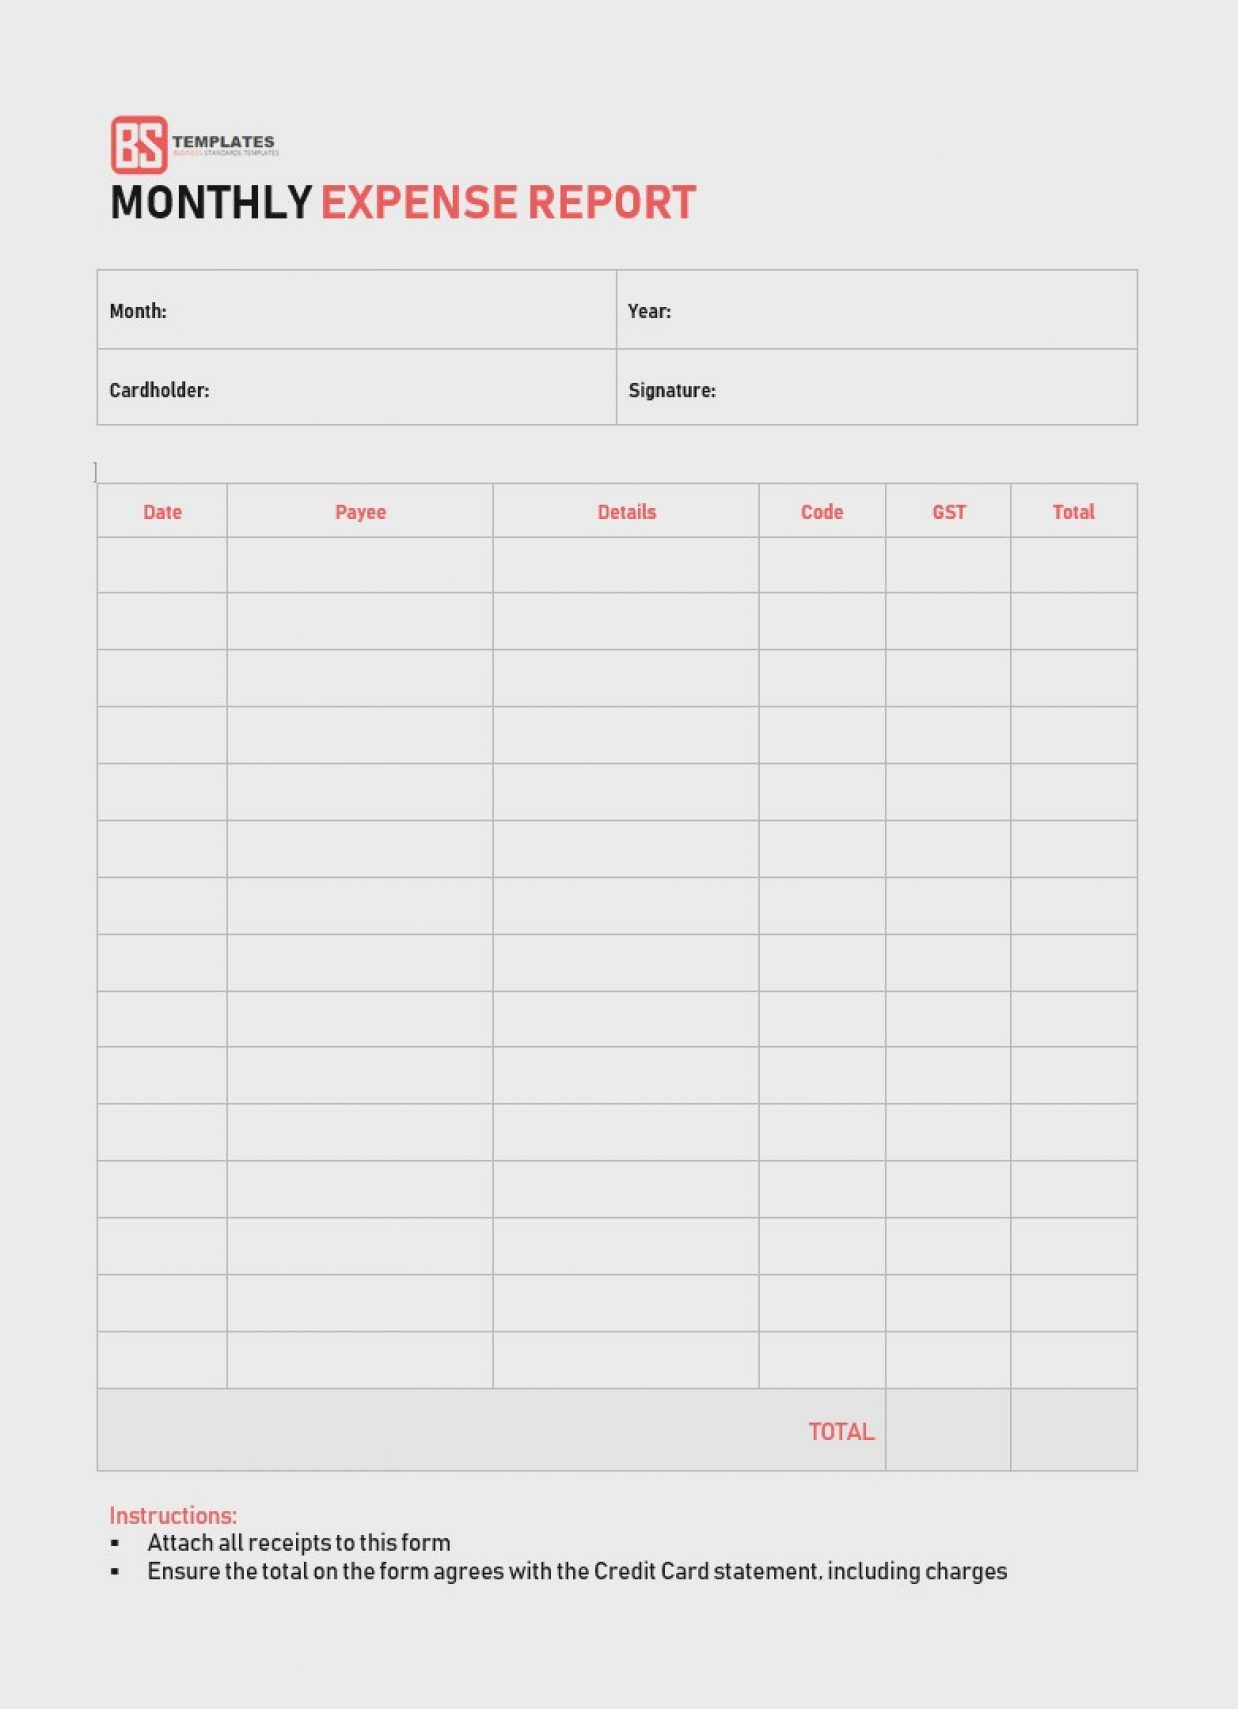 Excel Monthly Expense Report Business Template Sheet 2 Wonderful for Expense Report Form Excel